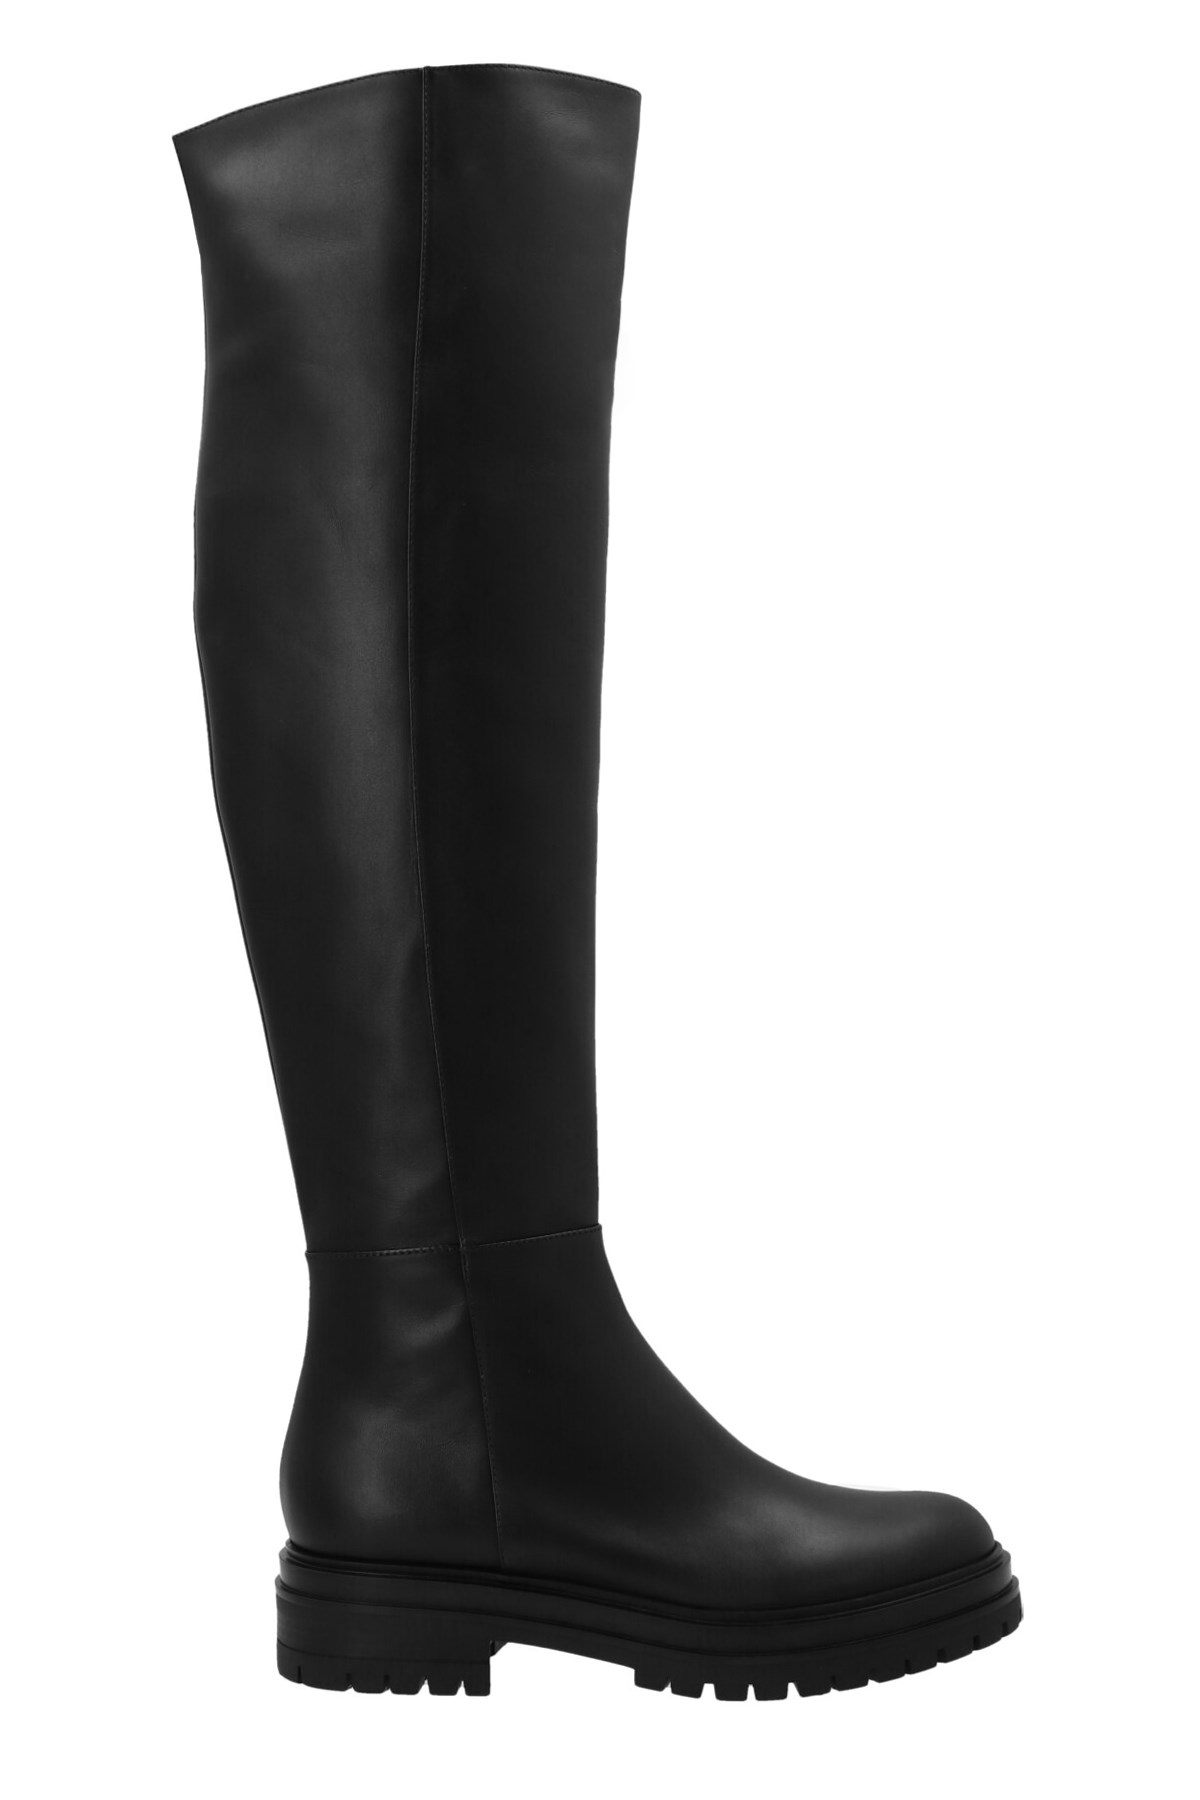 GIANVITO ROSSI 'Quinn’ Over-The-Knee Boots